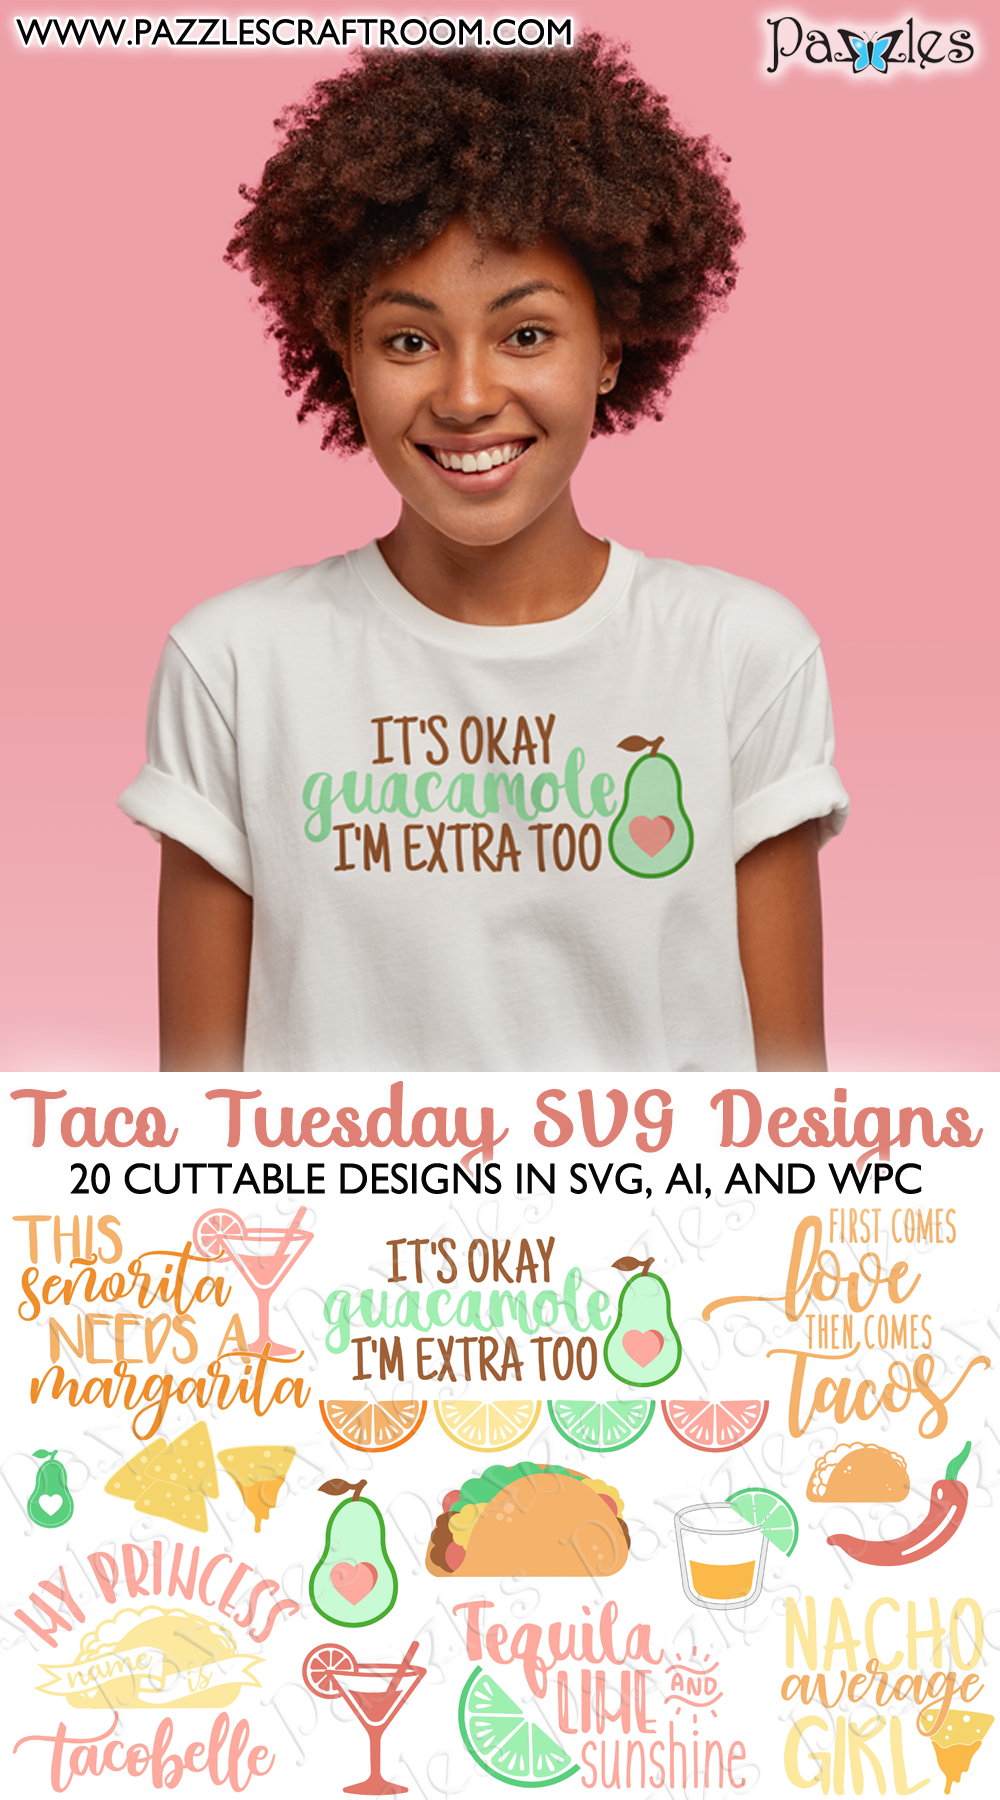 Pazzles DIY Taco Tuesday Collection with 20 cuttable files in SVG, AI, and WPC. Instant SVG download compatible with all major electronic cutters including Pazzles Inspiration, Cricut, and Silhouette Cameo. Design by Amanda Vander Woude.